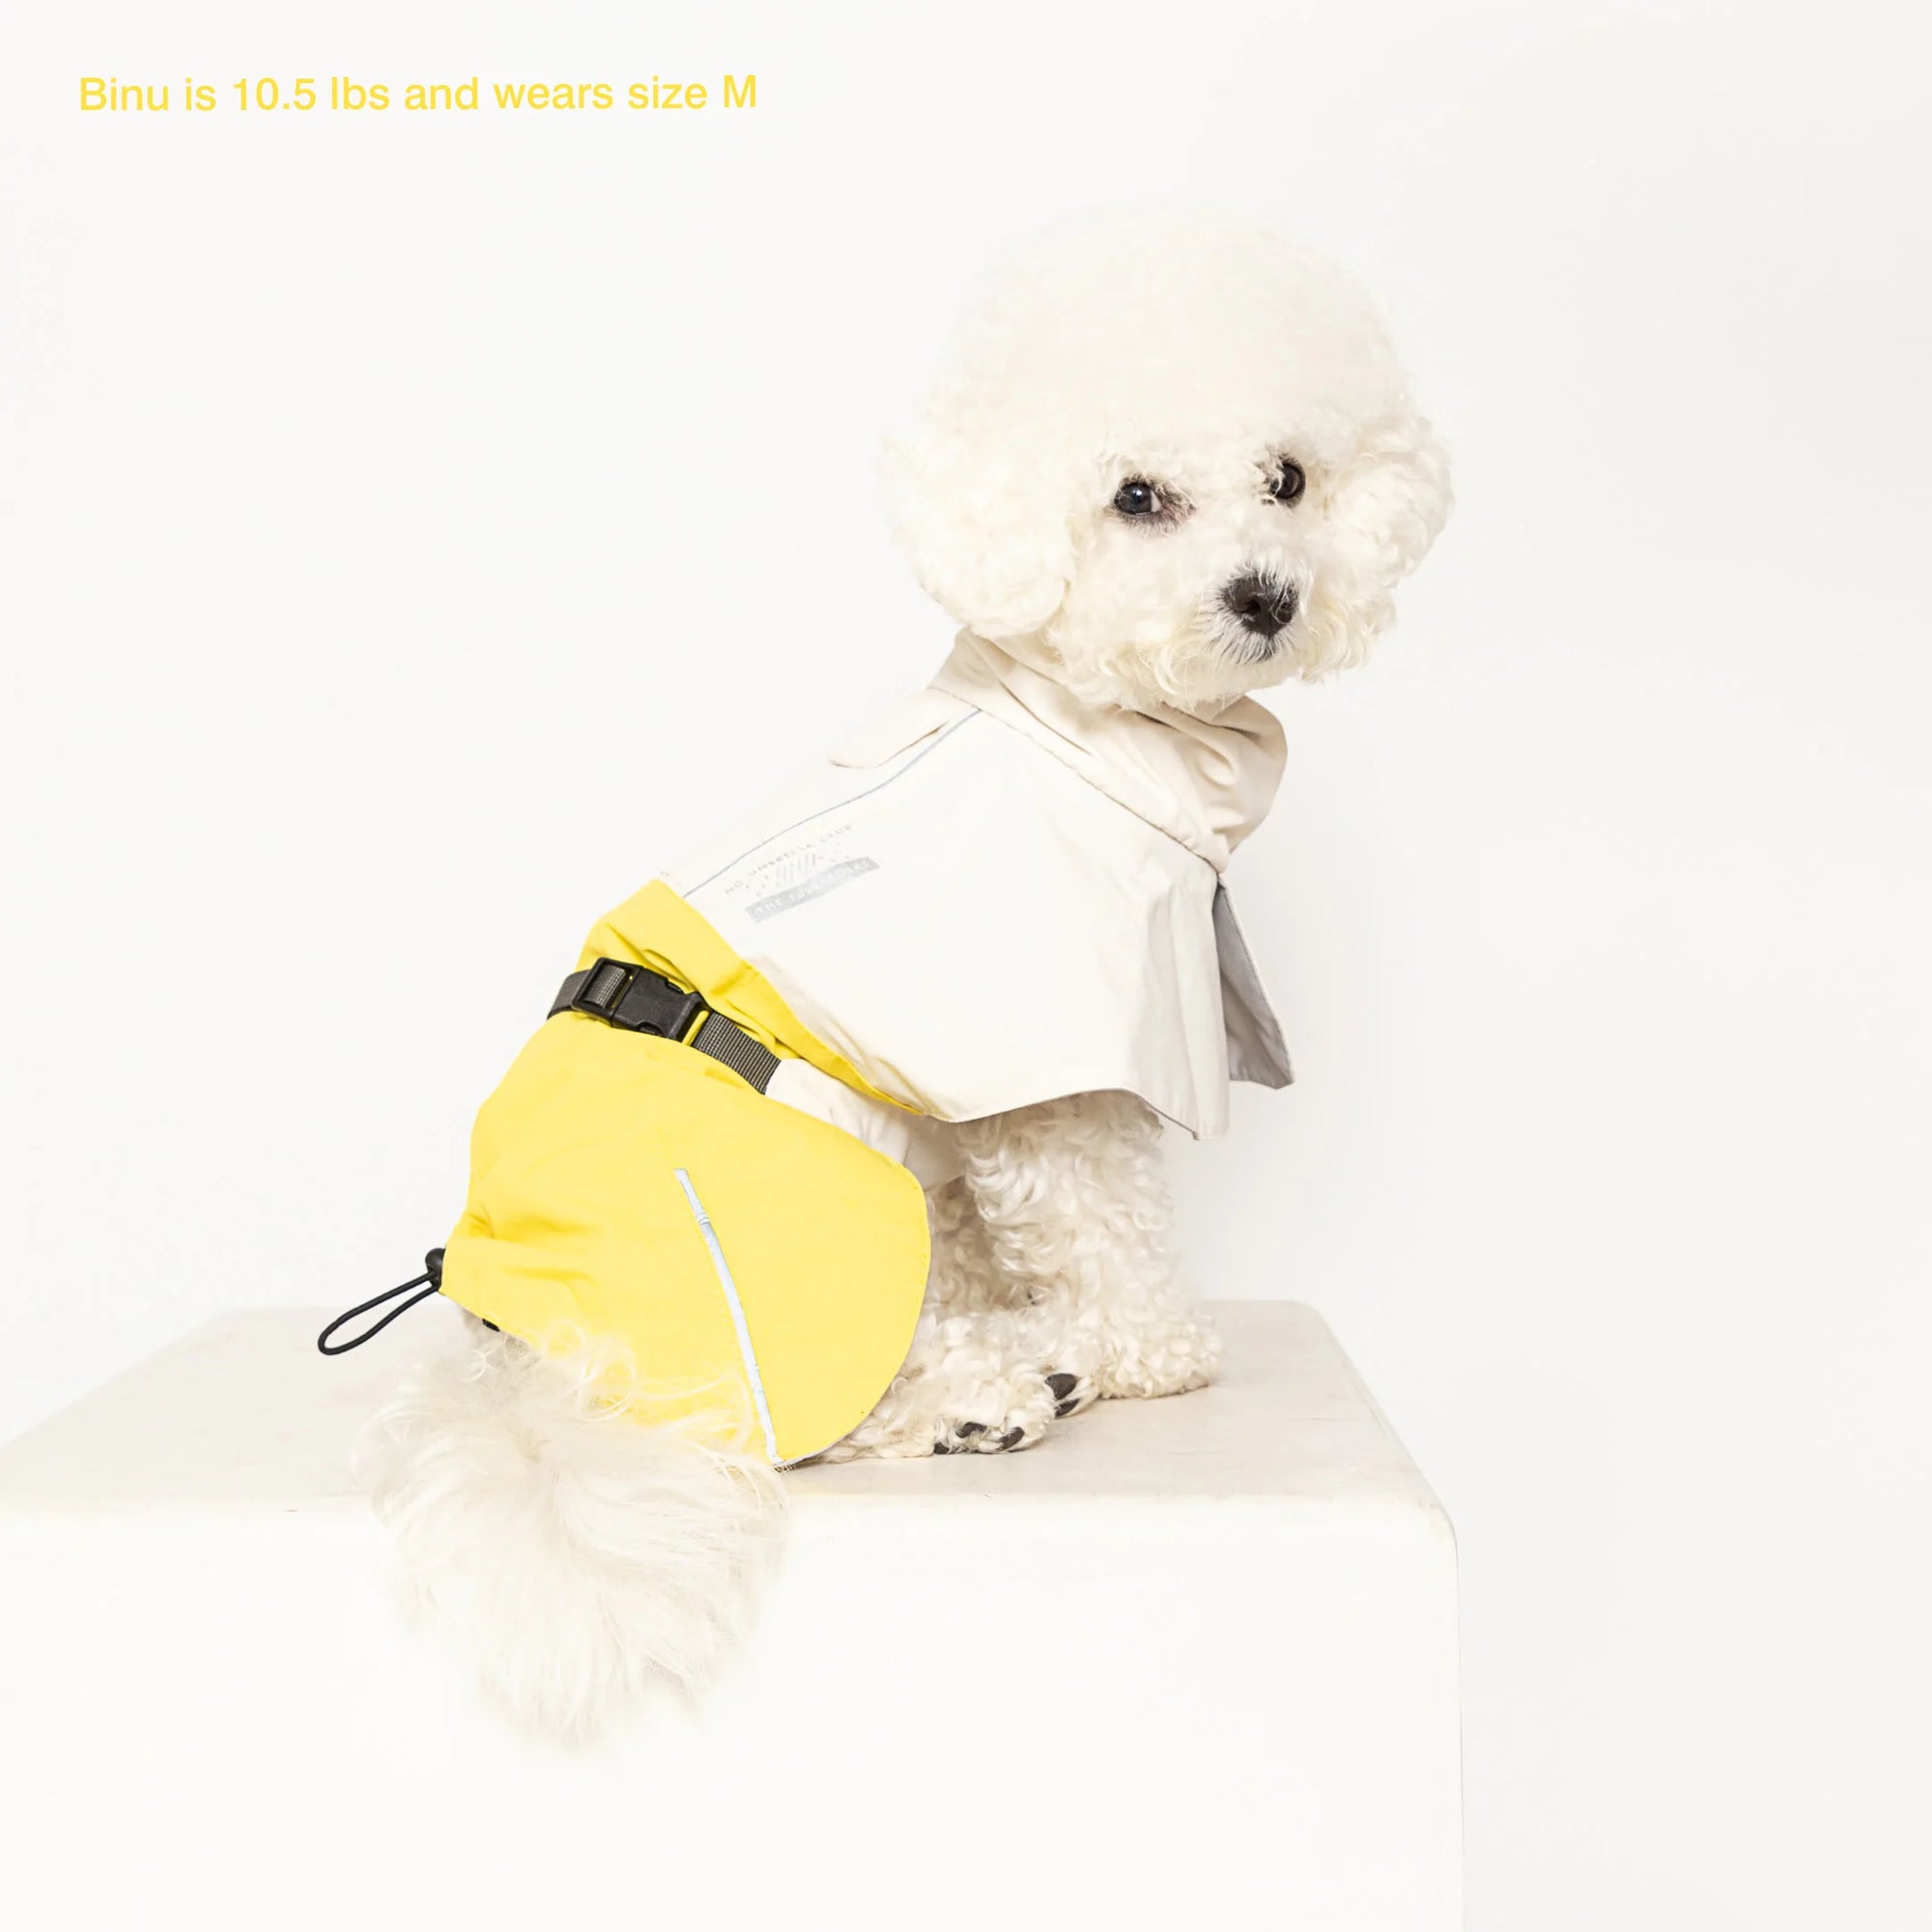 Binu, at 10.5 lbs, looks adorable in her size M yellow and cream raincoat.